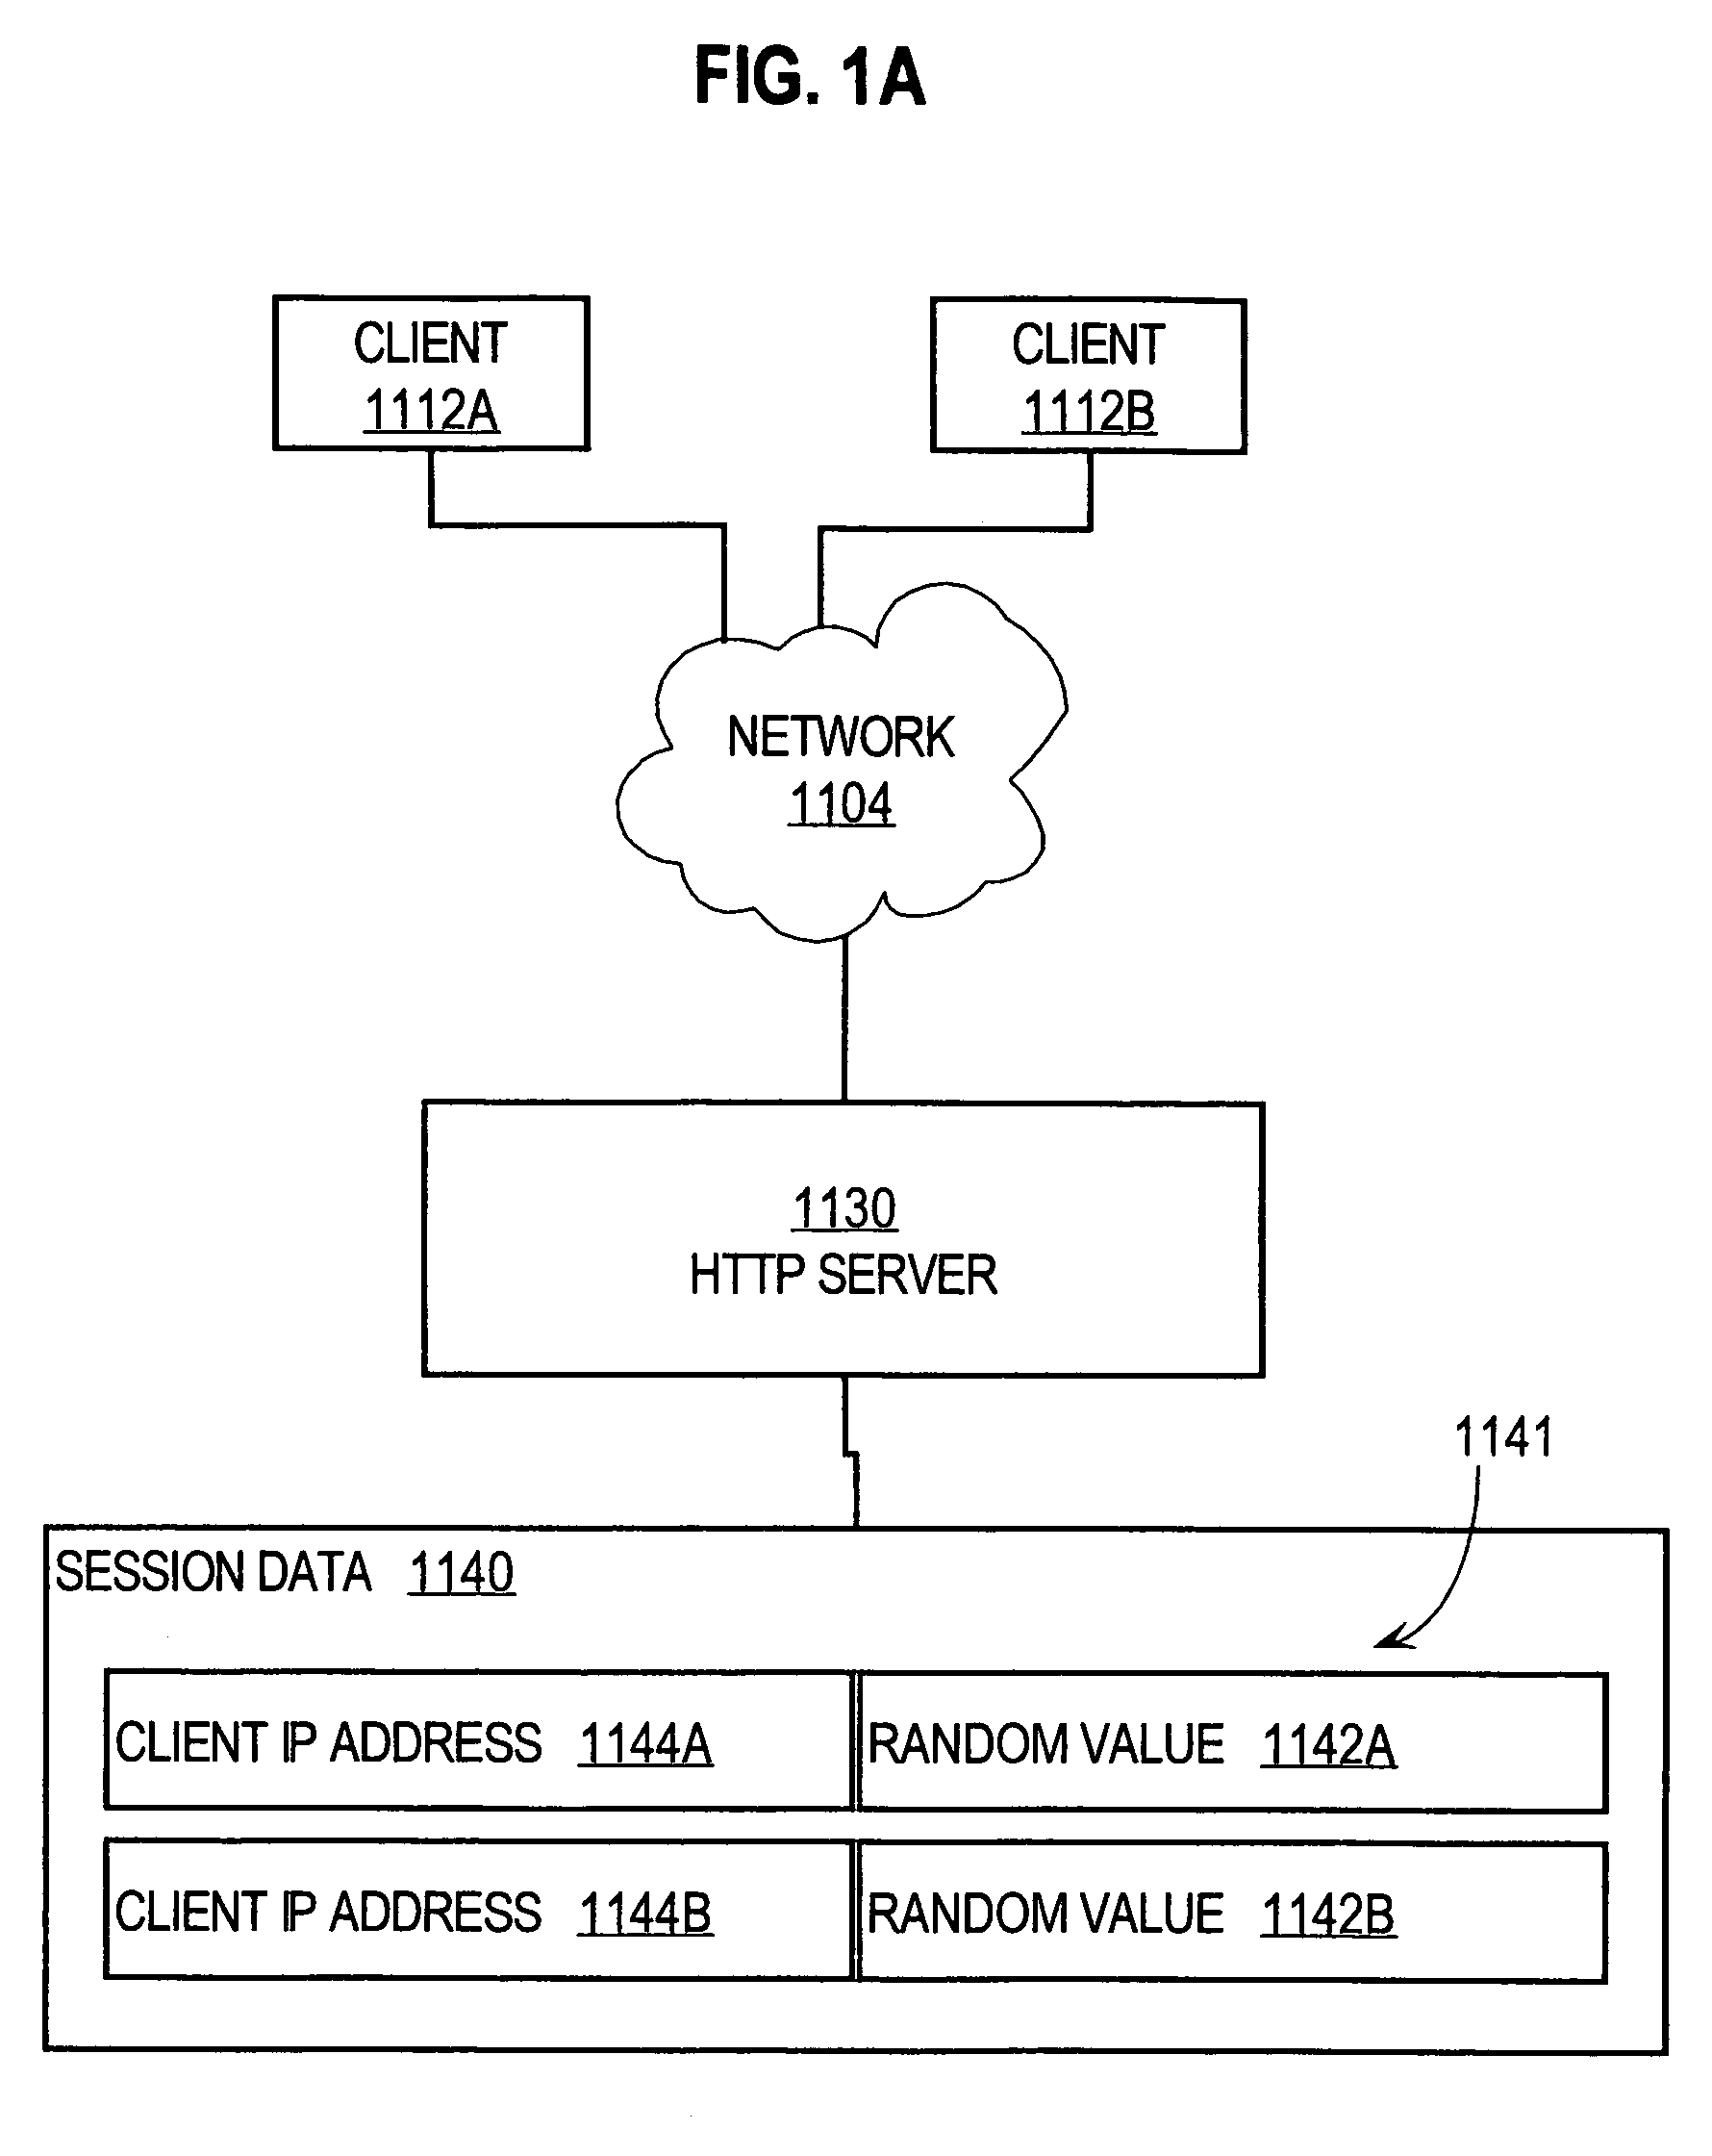 Selectively passing network addresses through a server